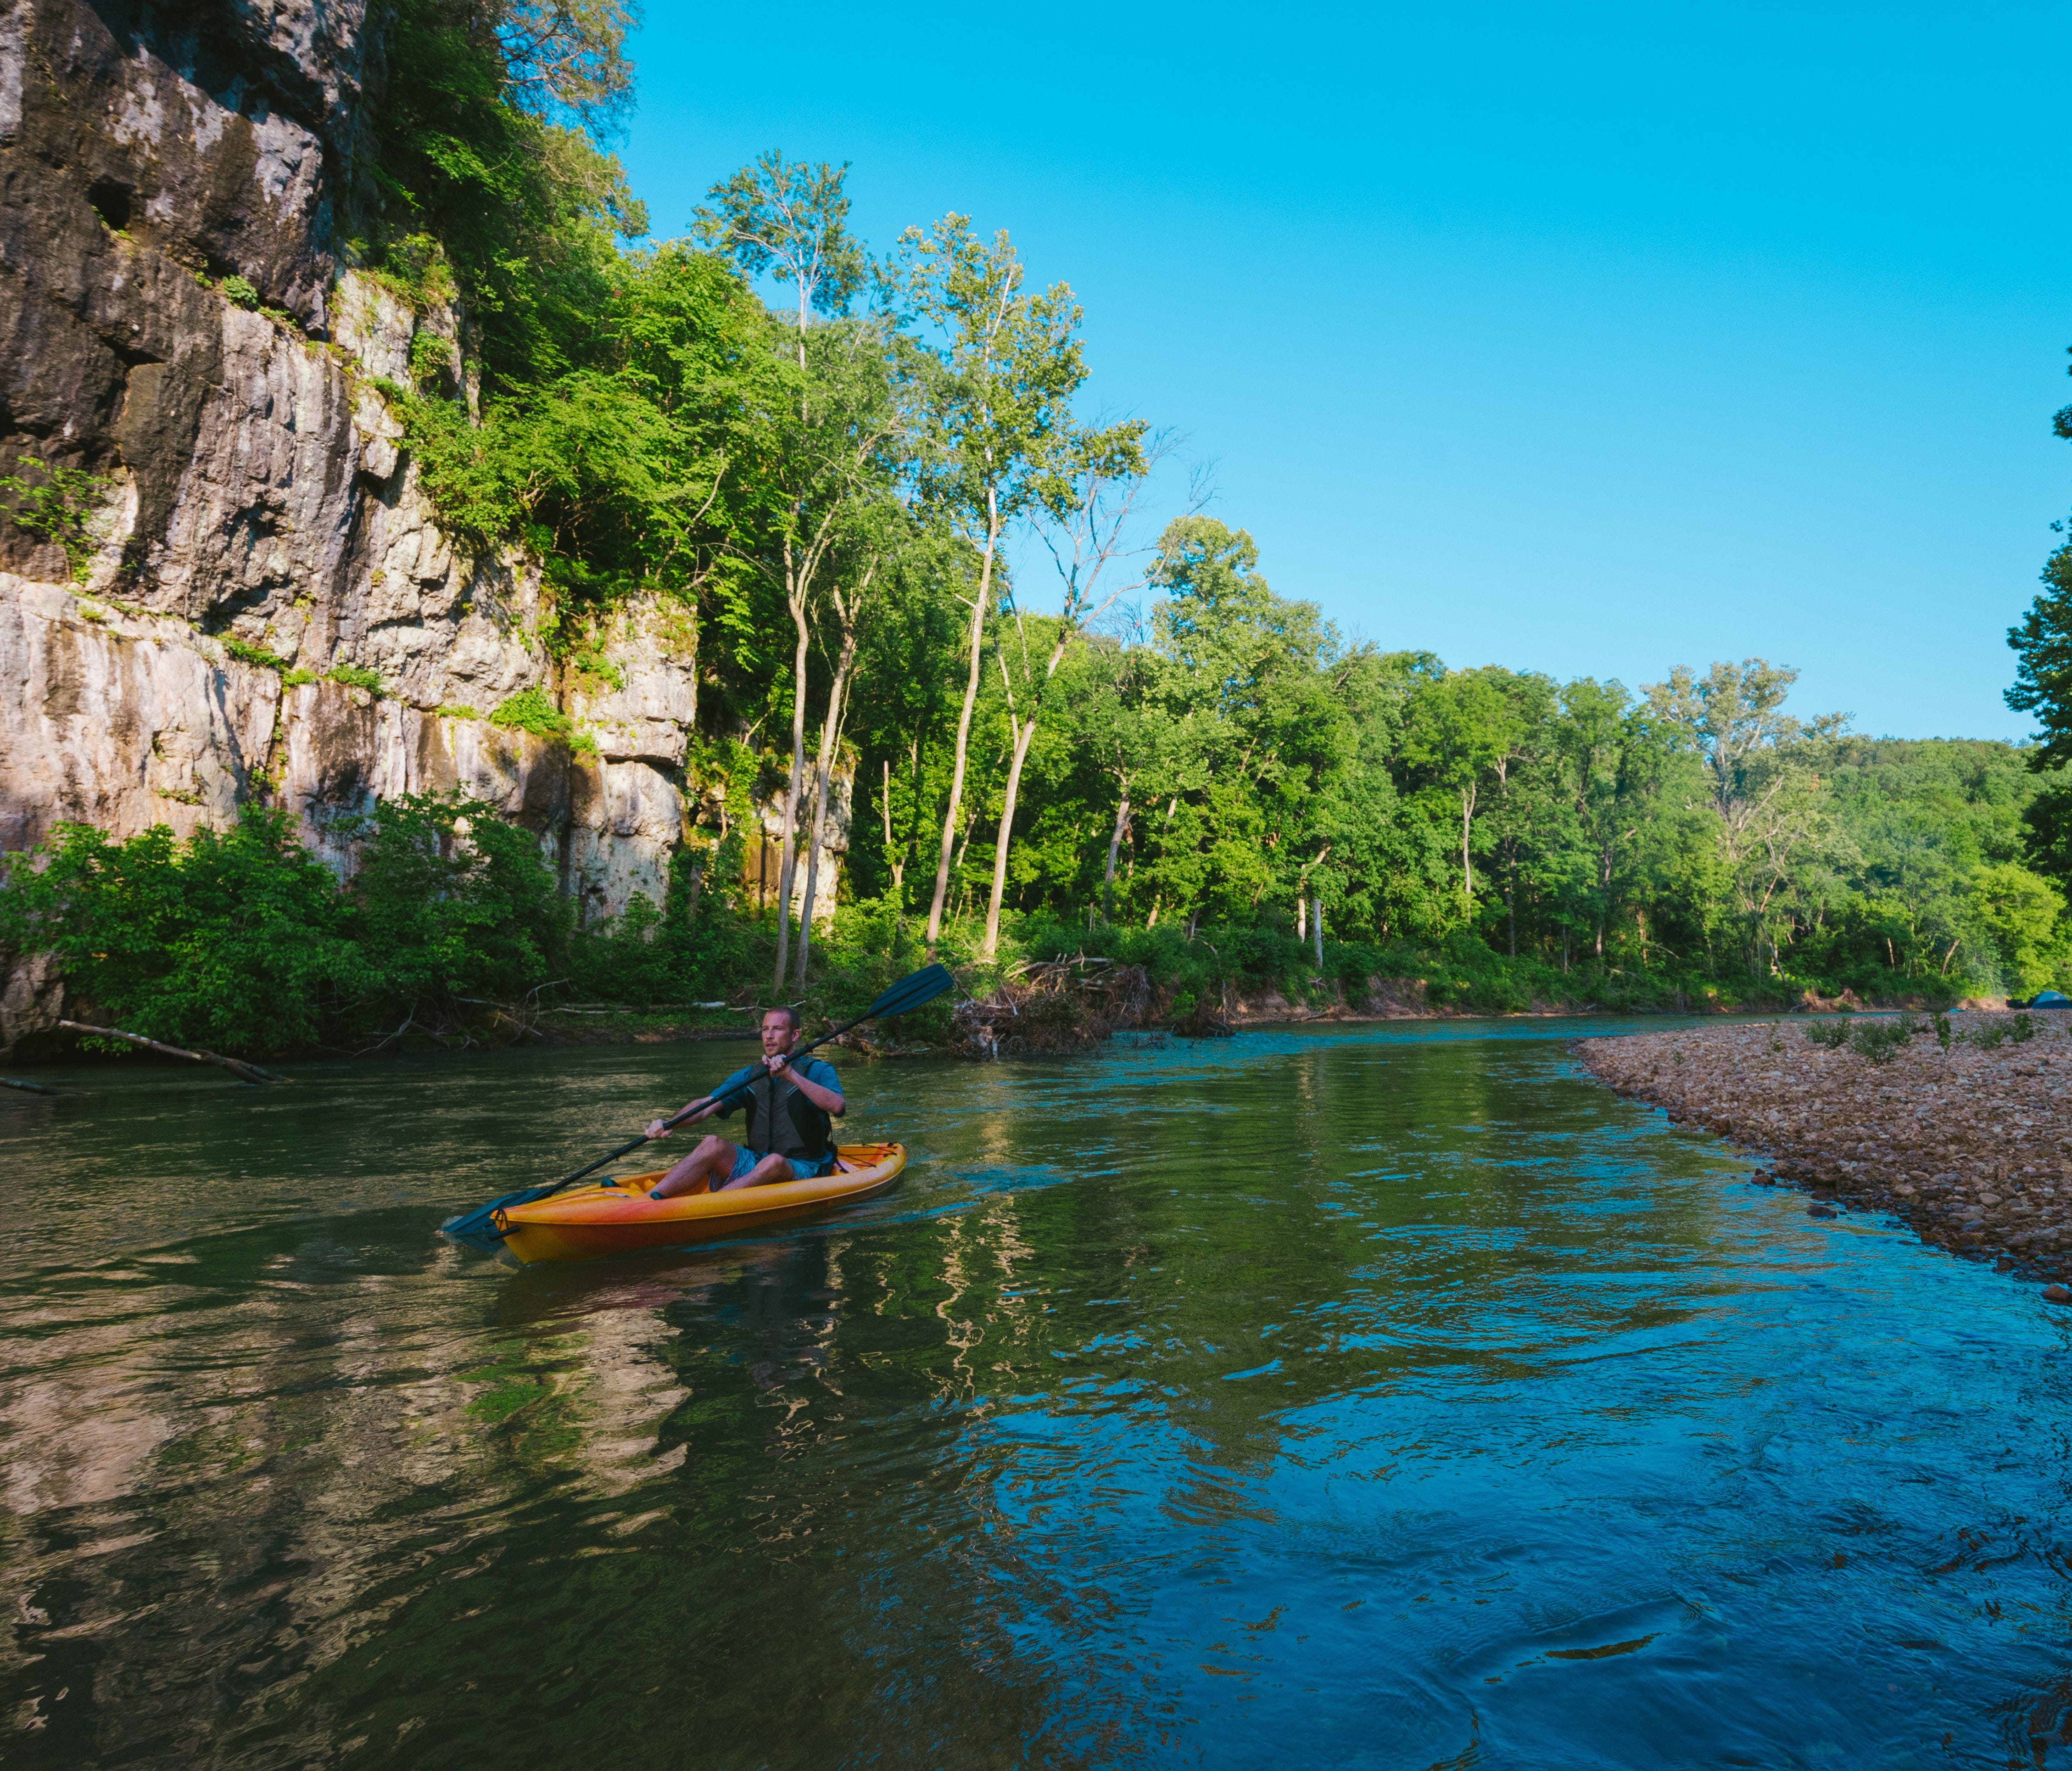 Current River, Ozark National Scenic Riverways.